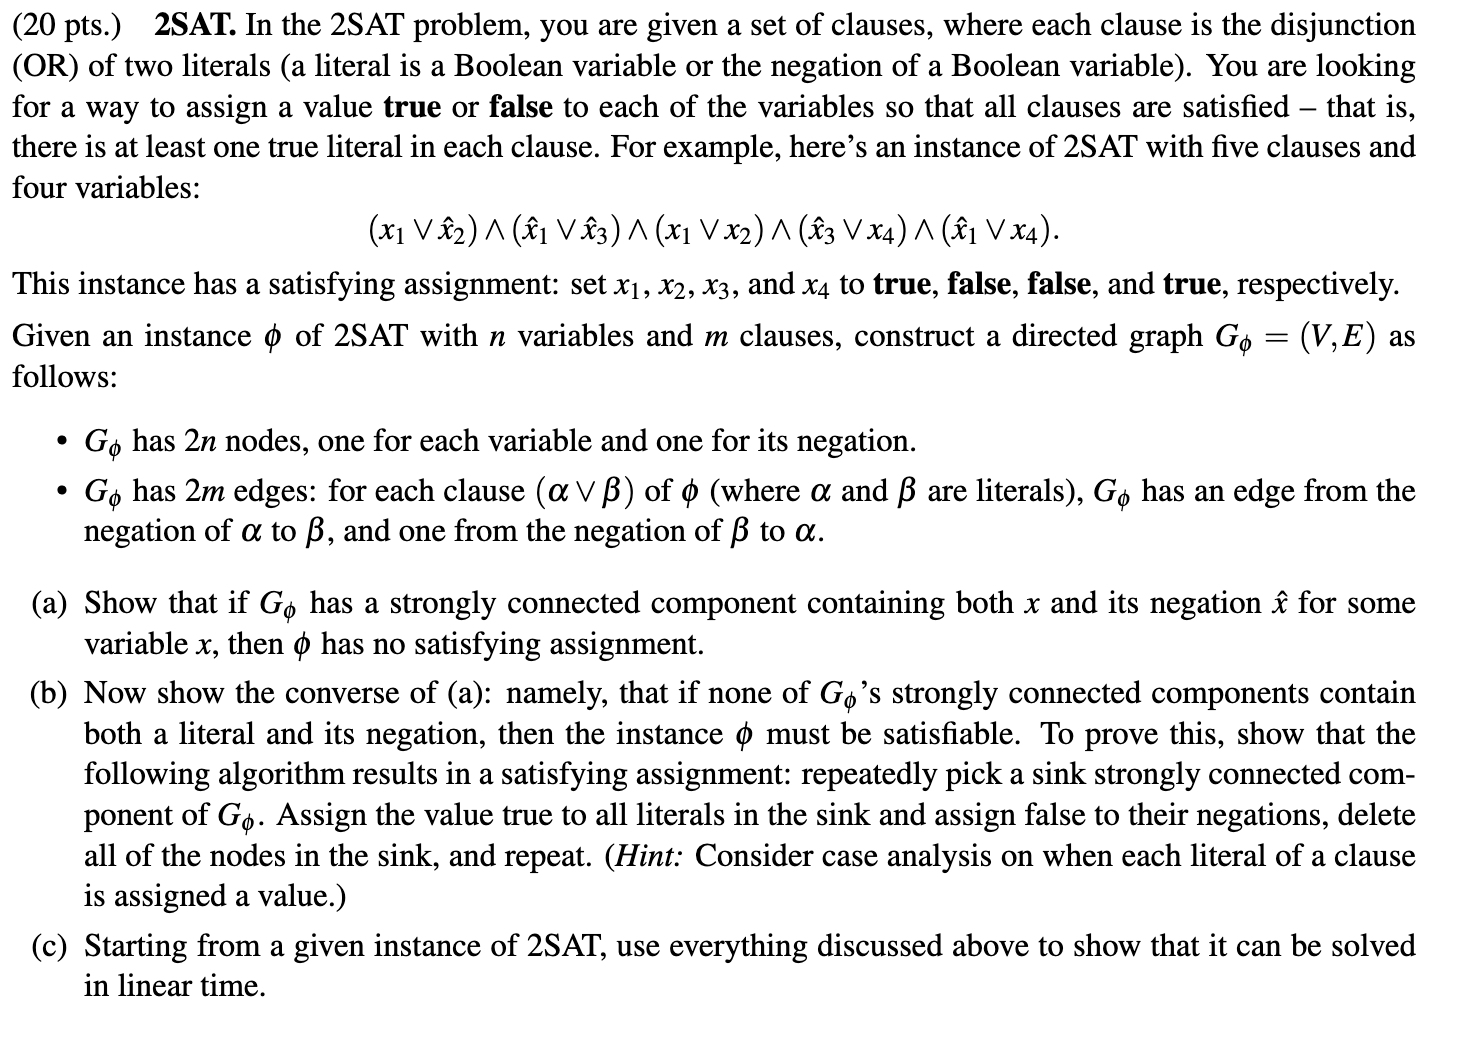 (20 pts.) 2SAT. In the 2SAT problem, you are given a set of clauses, where each clause is the disjunction